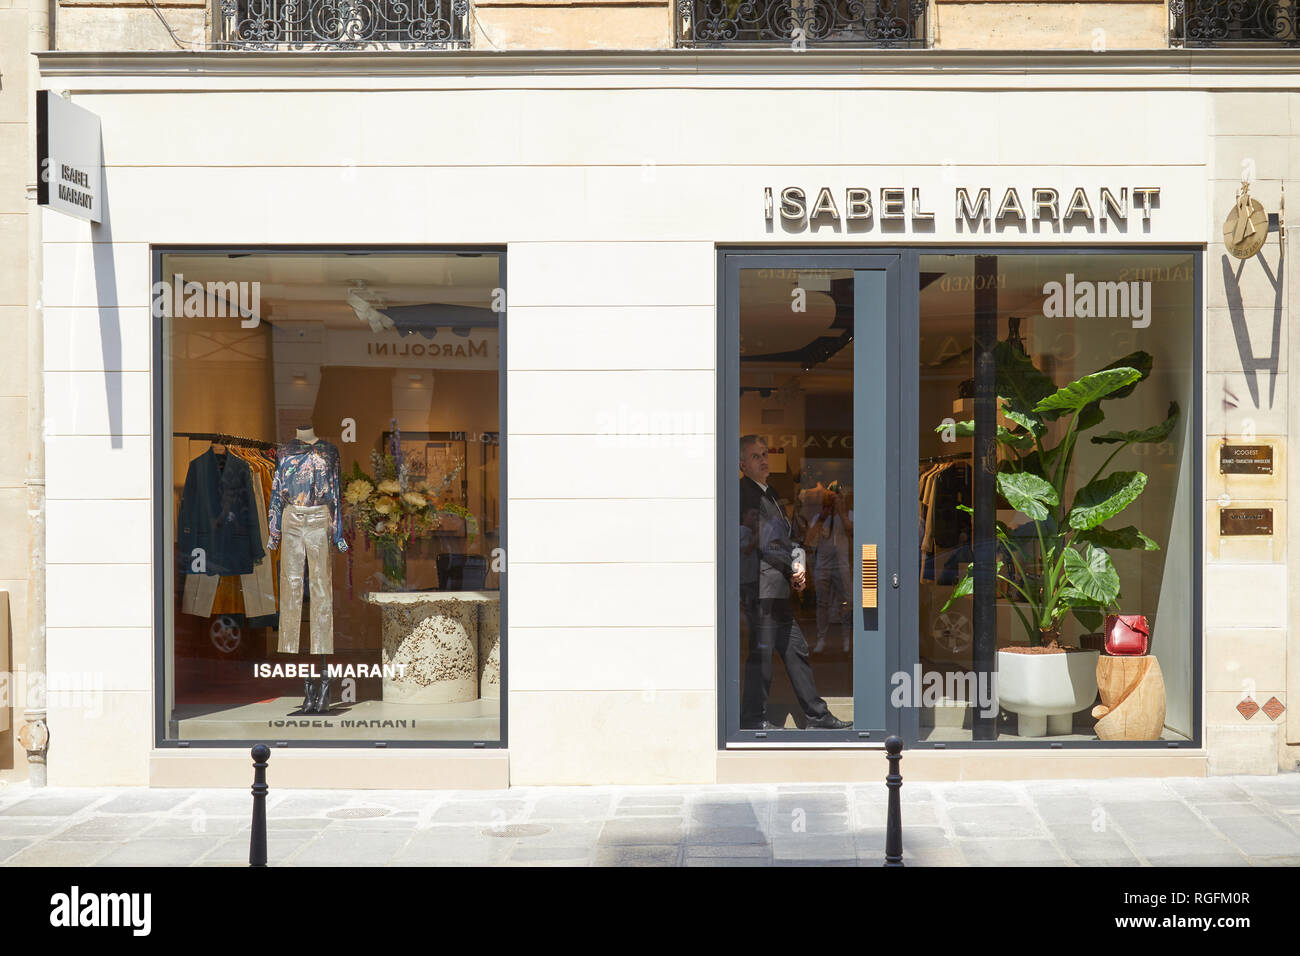 Isabel Marant High Resolution Stock Photography and Images Alamy